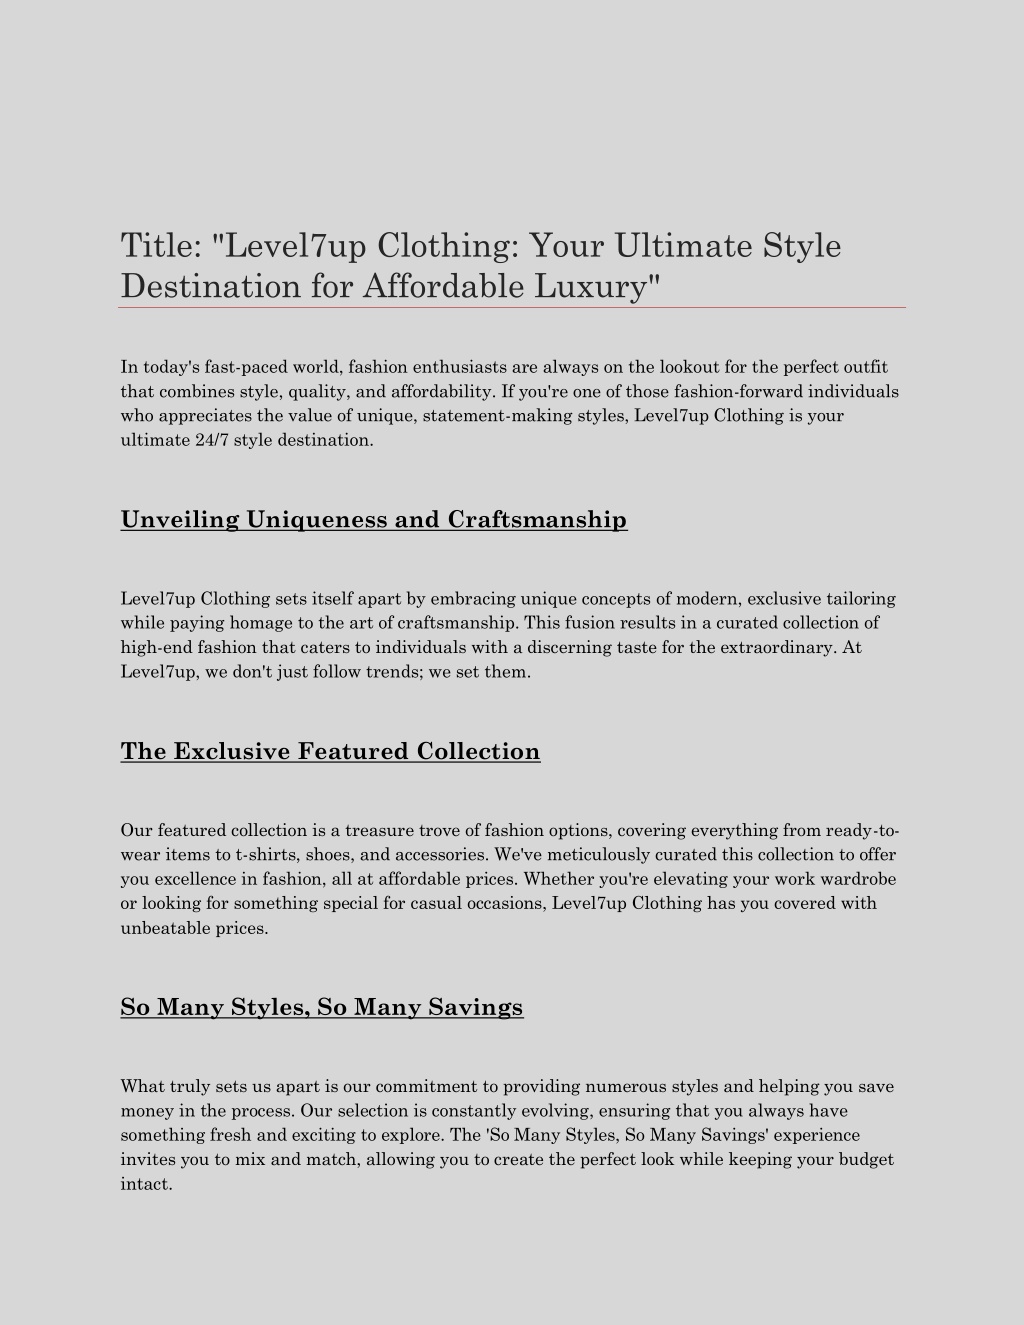 PPT - Level7up Clothing: Your Ultimate Style Destination for Affordable  Luxury PowerPoint Presentation - ID:12600647